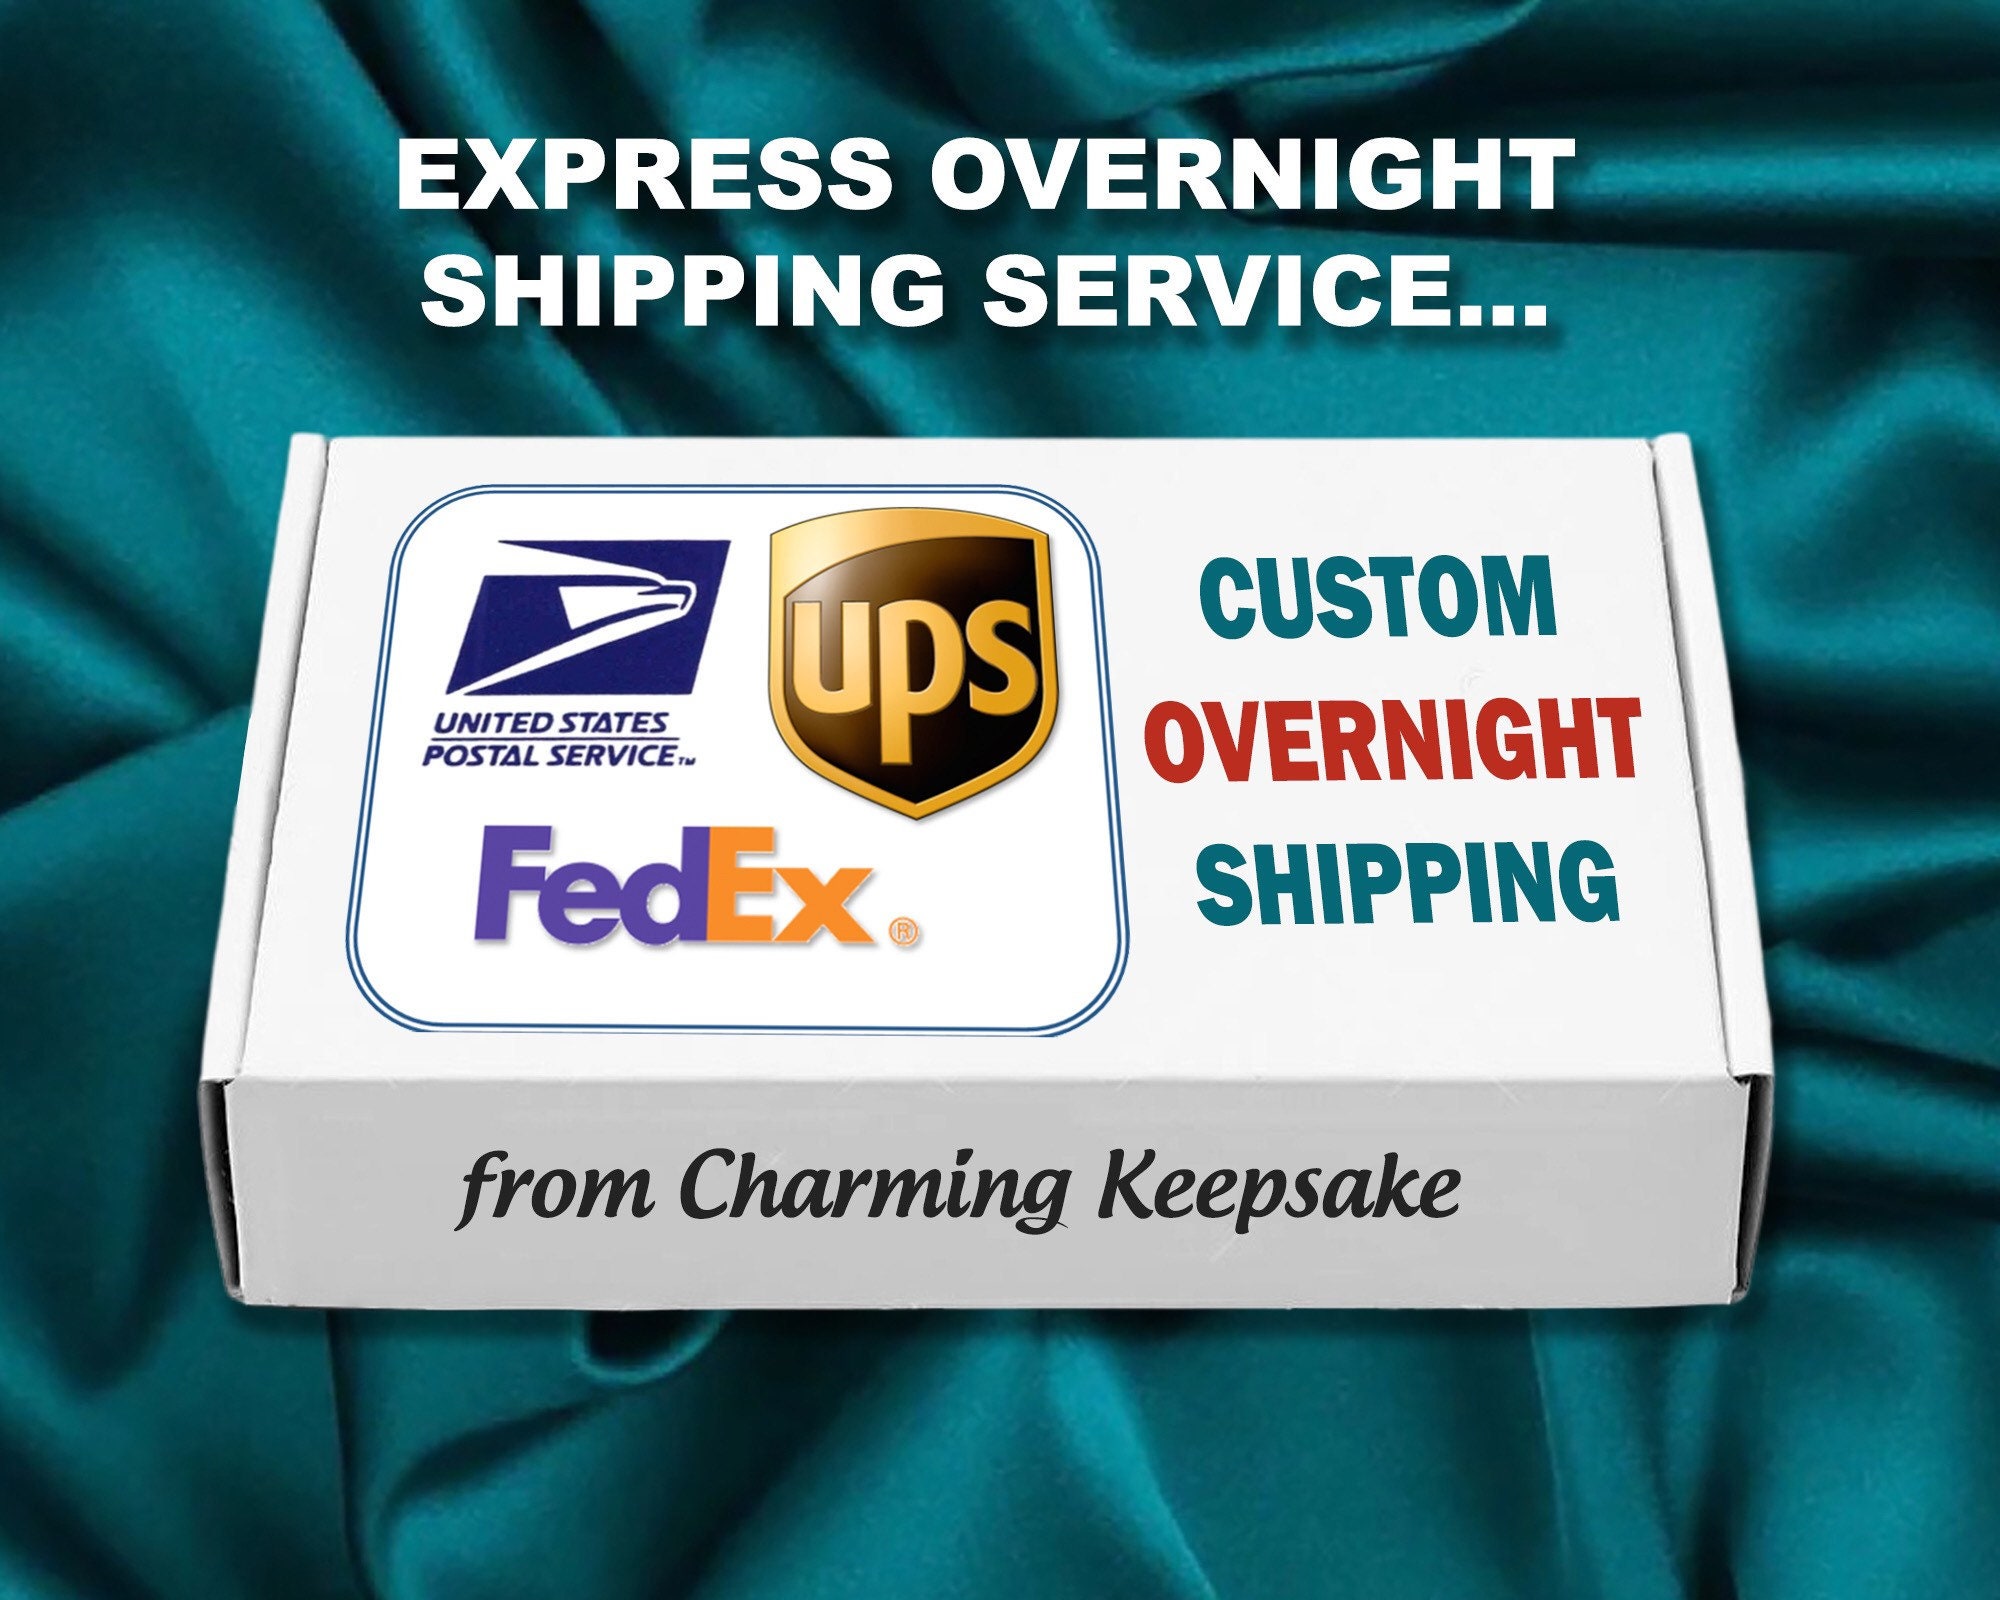 Expedited OVER NIGHT Shipping via UPS, FedEx, Priority Express Mail,  delivery, 1 or 2 day delivery, Domestic U.S. Shipment Only